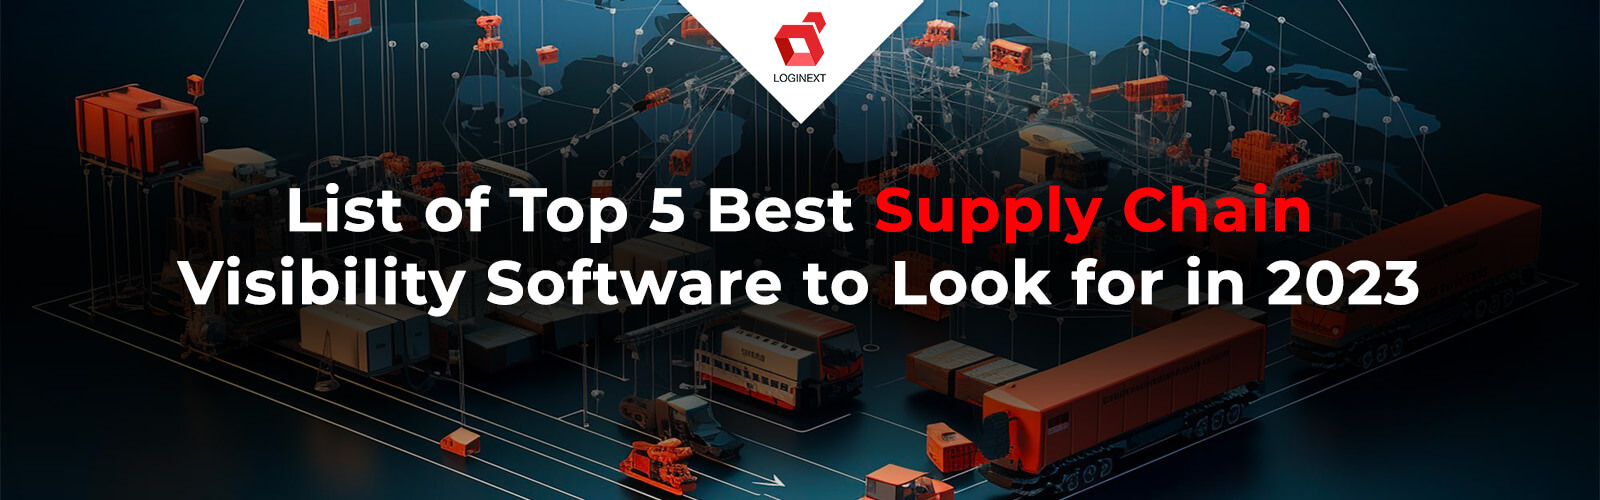 Top 5 Best Supply Chain Visibility Software To Choose From